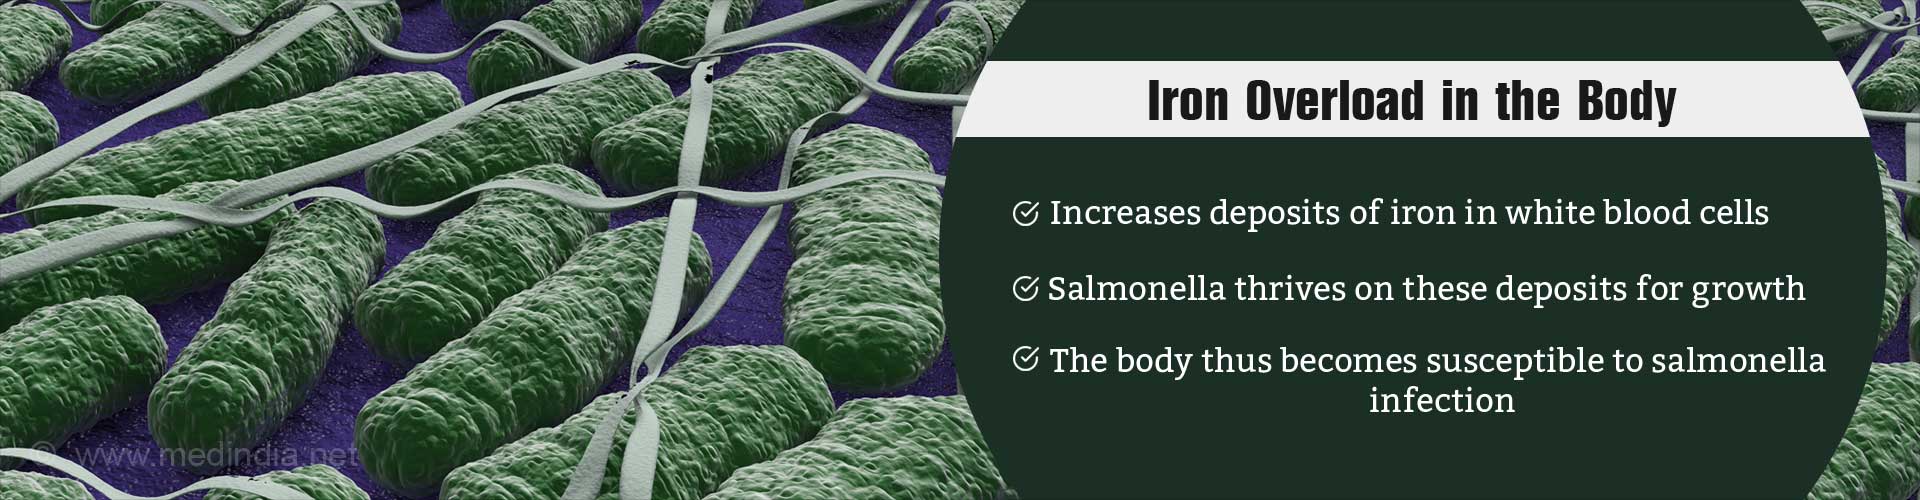 Iron Overload in the Body
- Increases deposits of iron in white blood cells
- Salmonella thrives on these deposits for growth
- The body thus becomes susceptible to salmonella infection